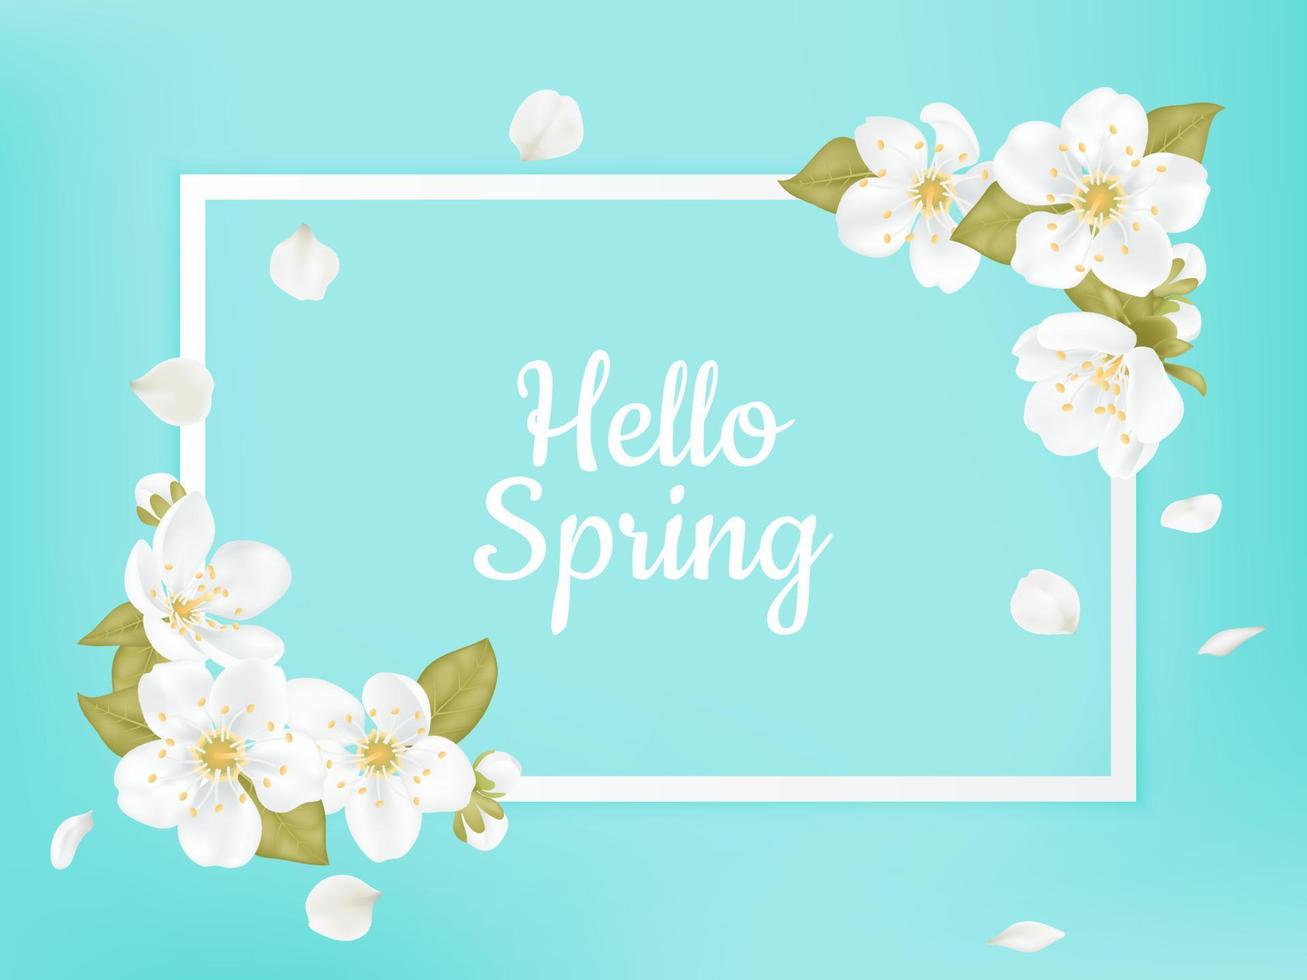 Rectangle banner, Hello Spring. Card for spring season with cherry blossom wreath frame, promotion offer  spring plants, leaves and white sakura flowers decoration on blue background. Design template. vector